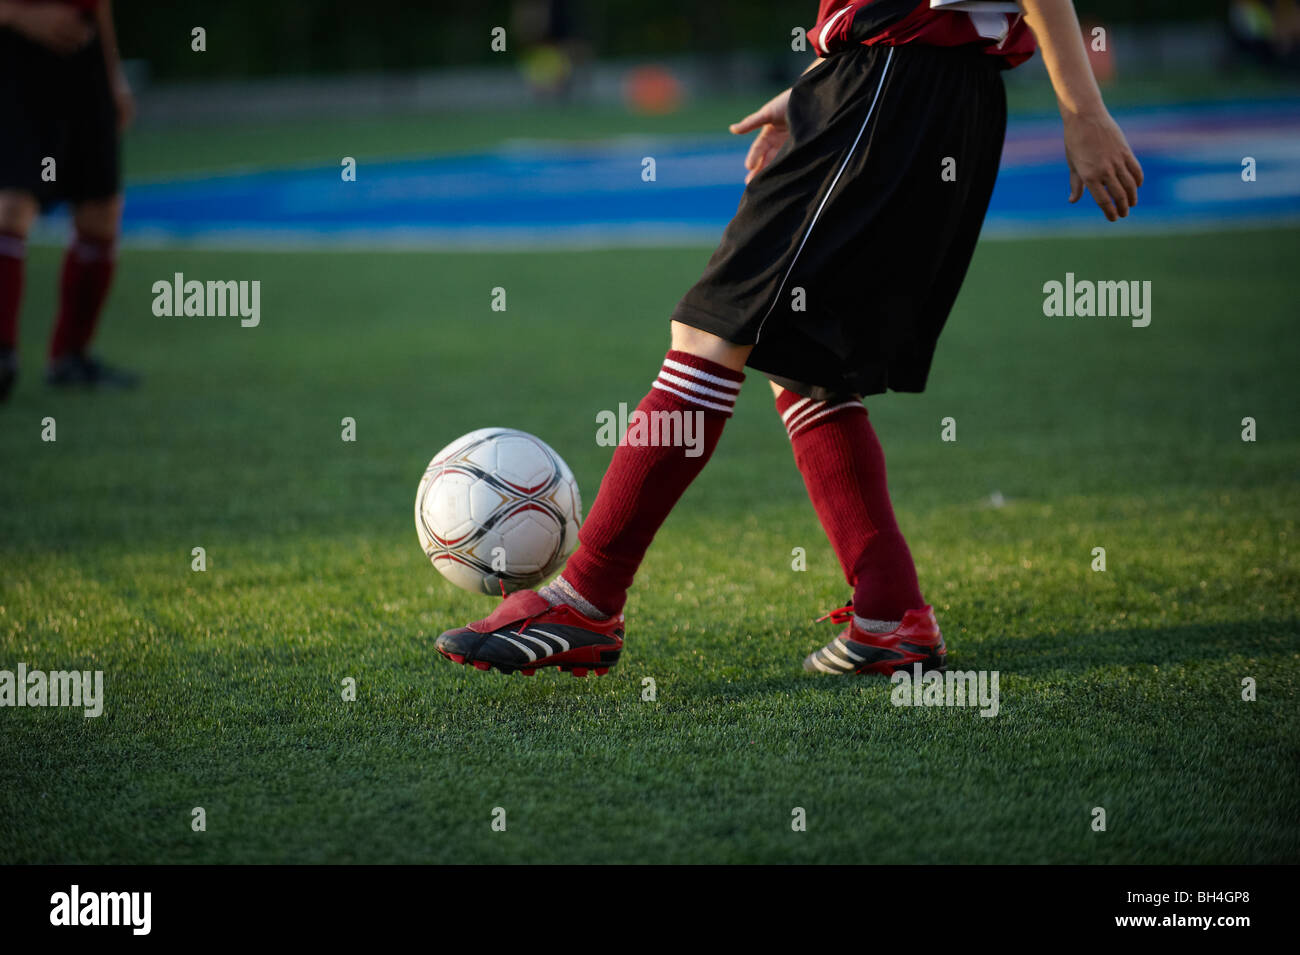 Young boy kicking ball before soccer match Stock Photo